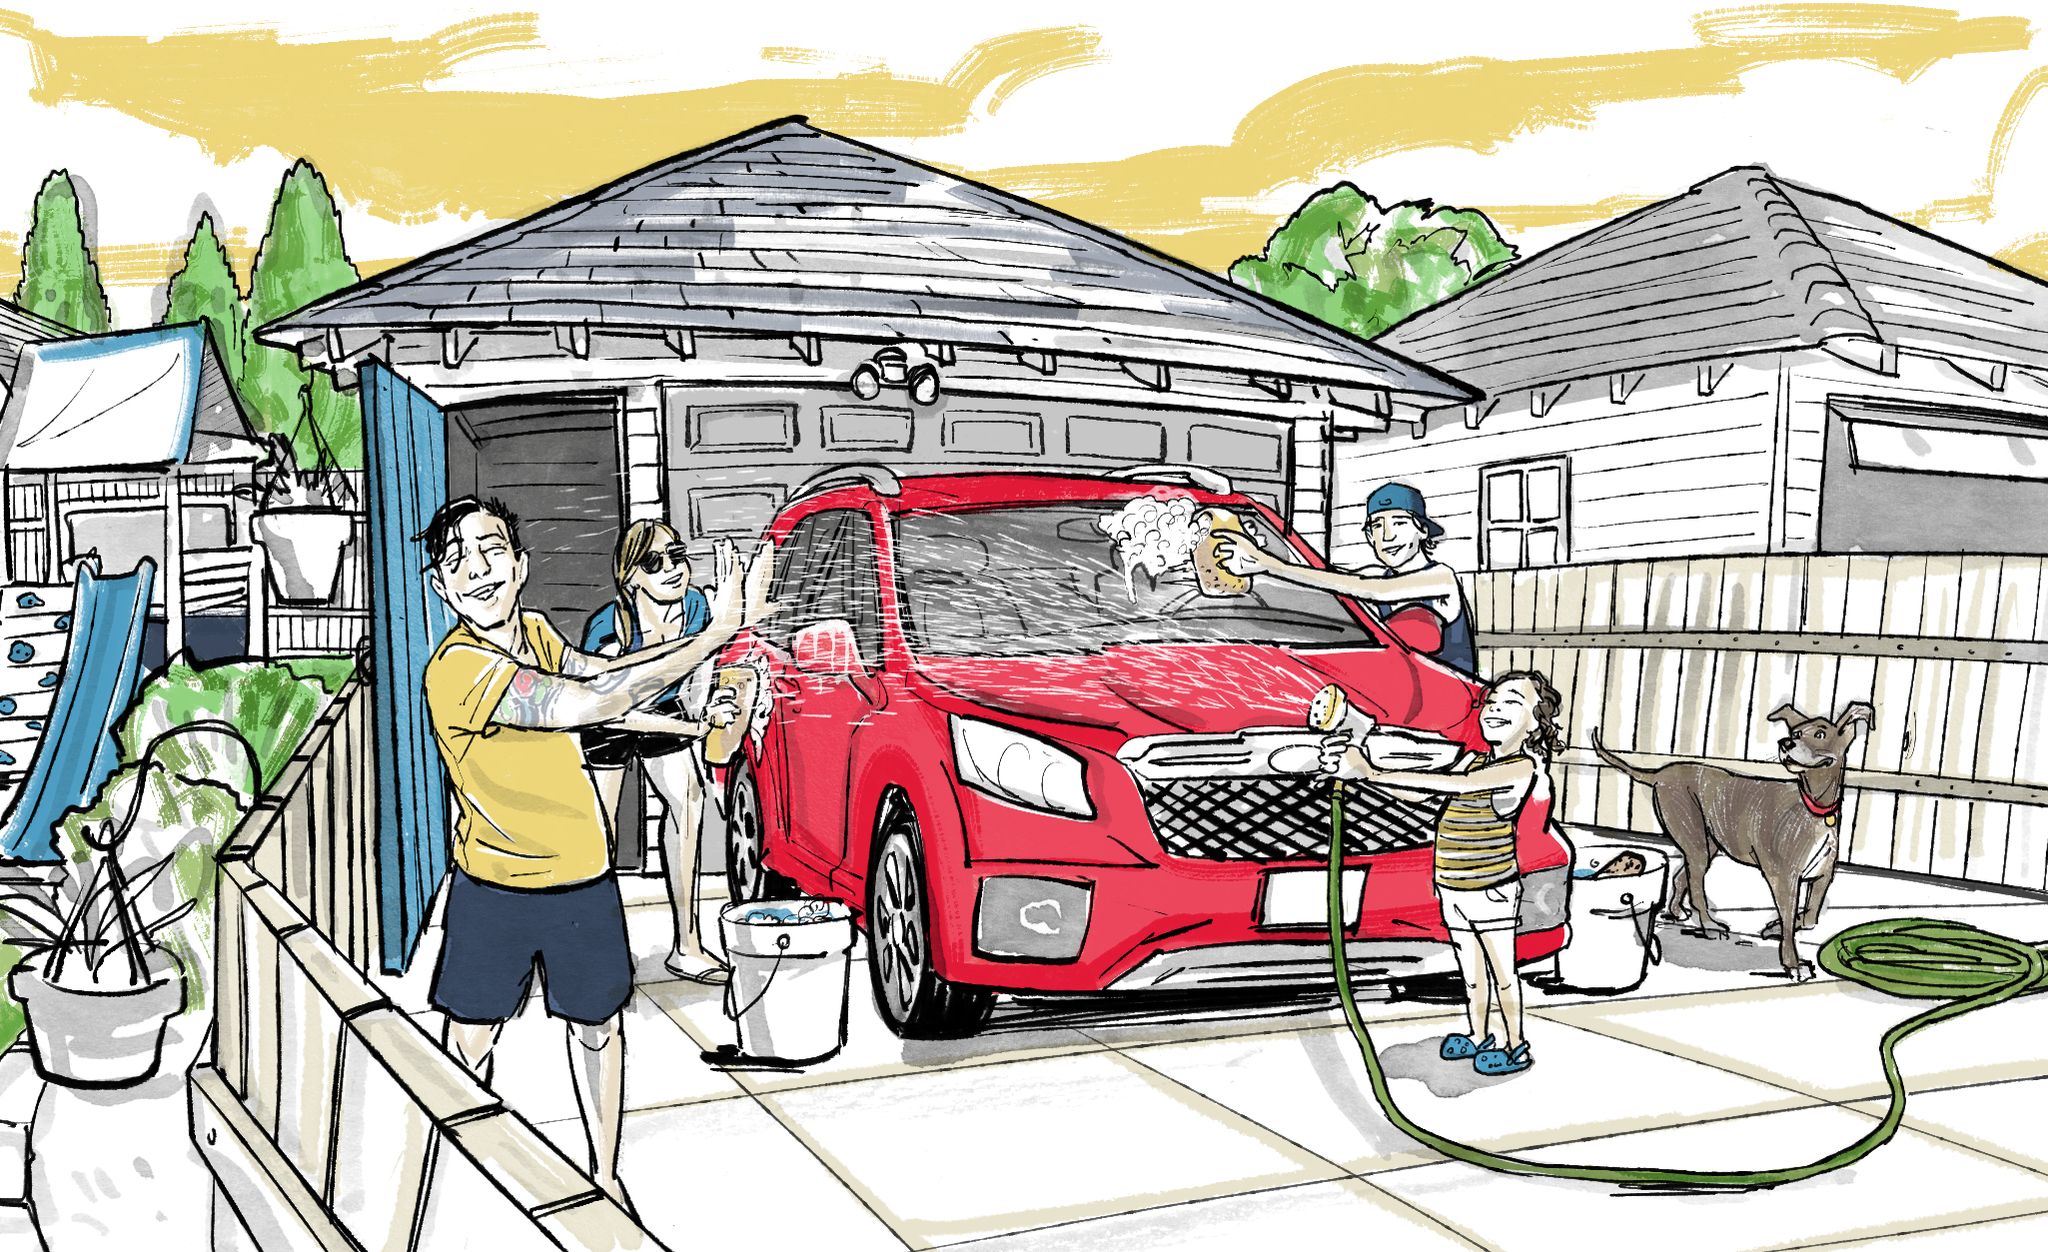 a family takes delight in washing their red family vehicle